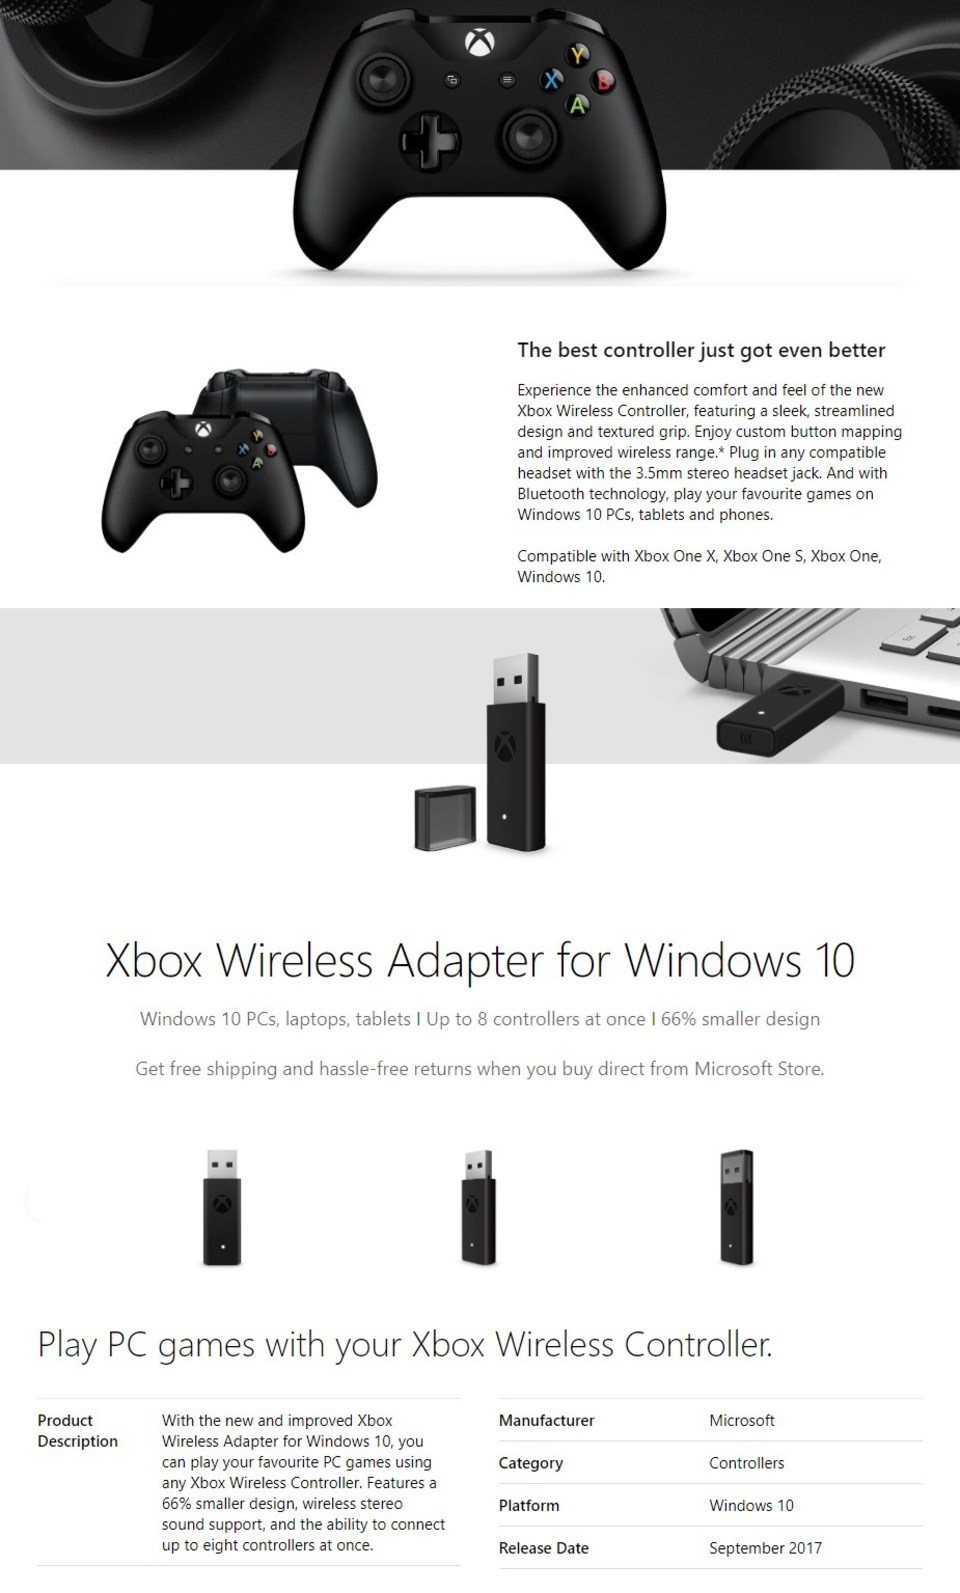 microsoft xbox one s controller and wireless adapter for windows 10 black